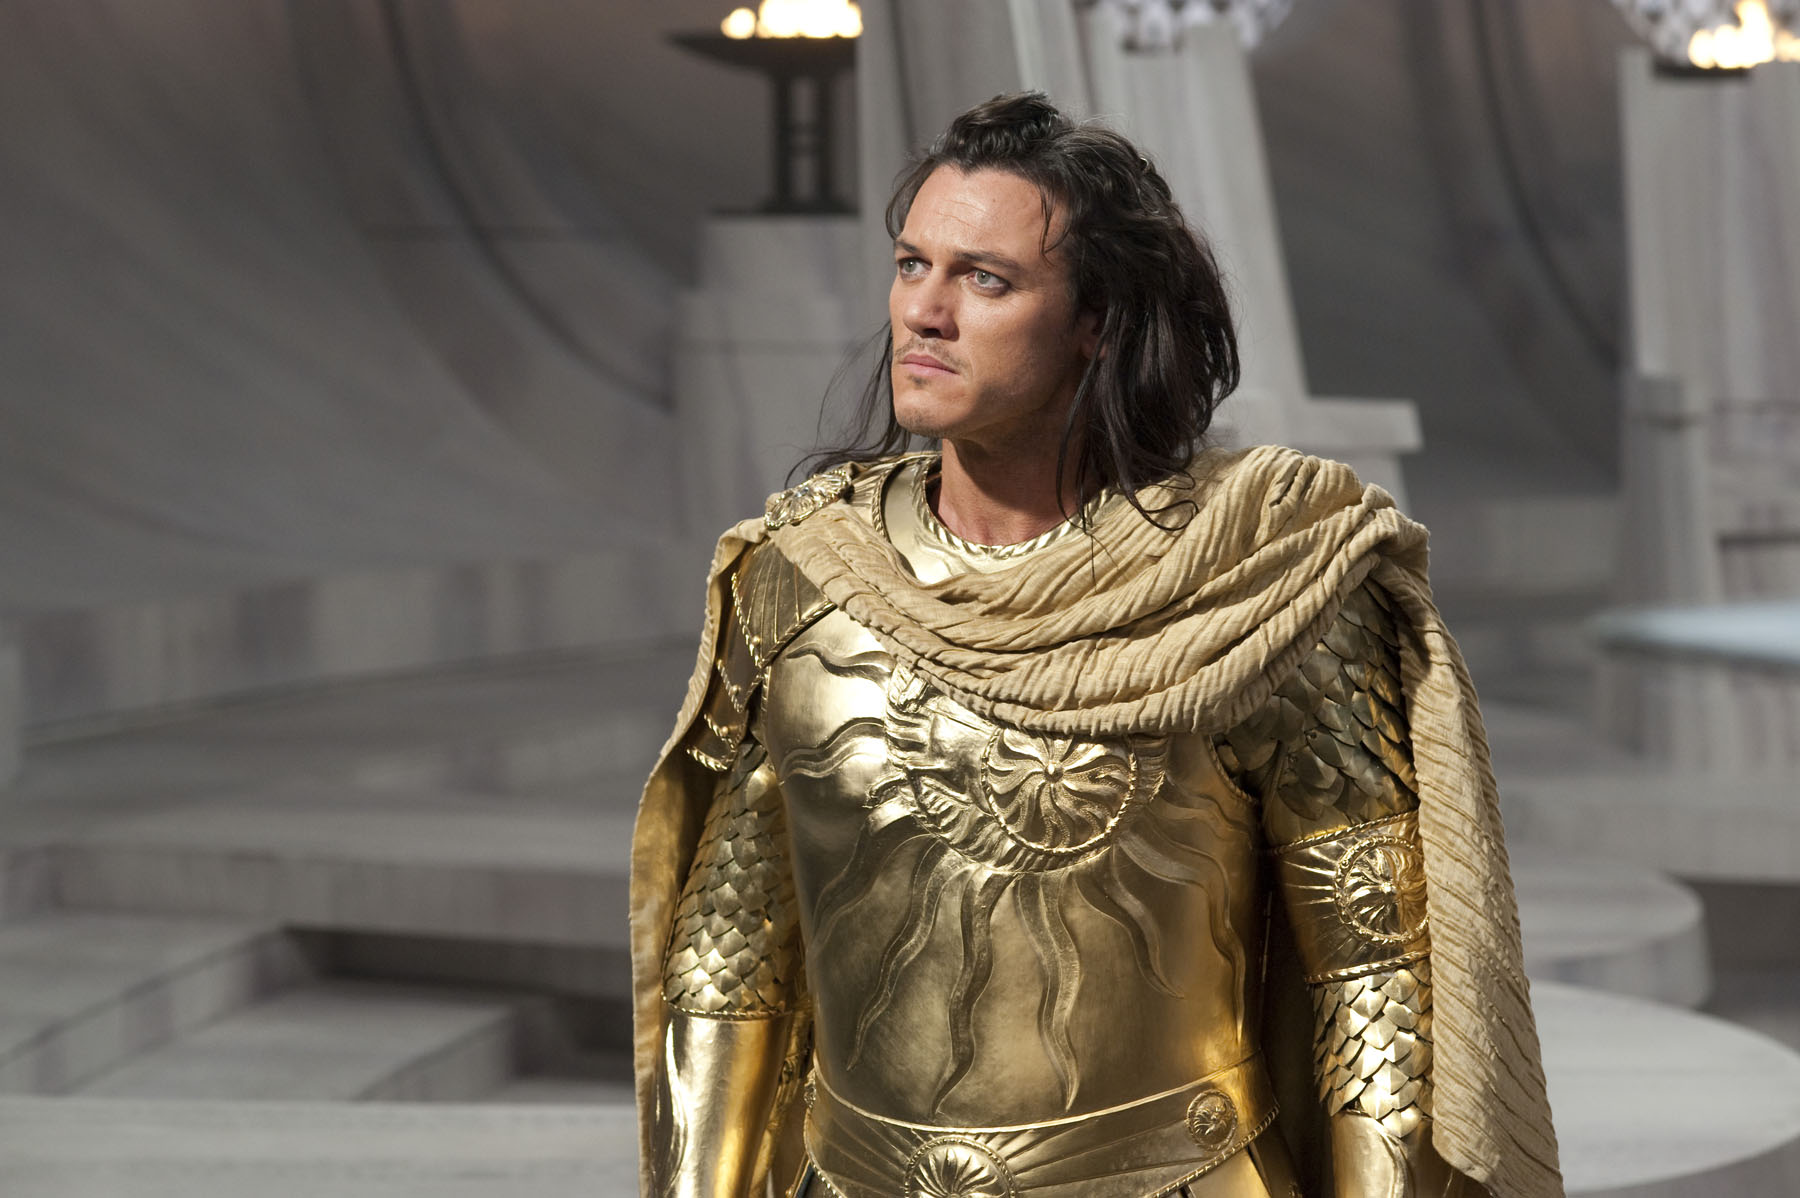 LUKE EVANS as Apollo in Warner Bros. Pictures and Legendary Pictures Clash of the Titans, distributed by Warner Bros. Pictures.